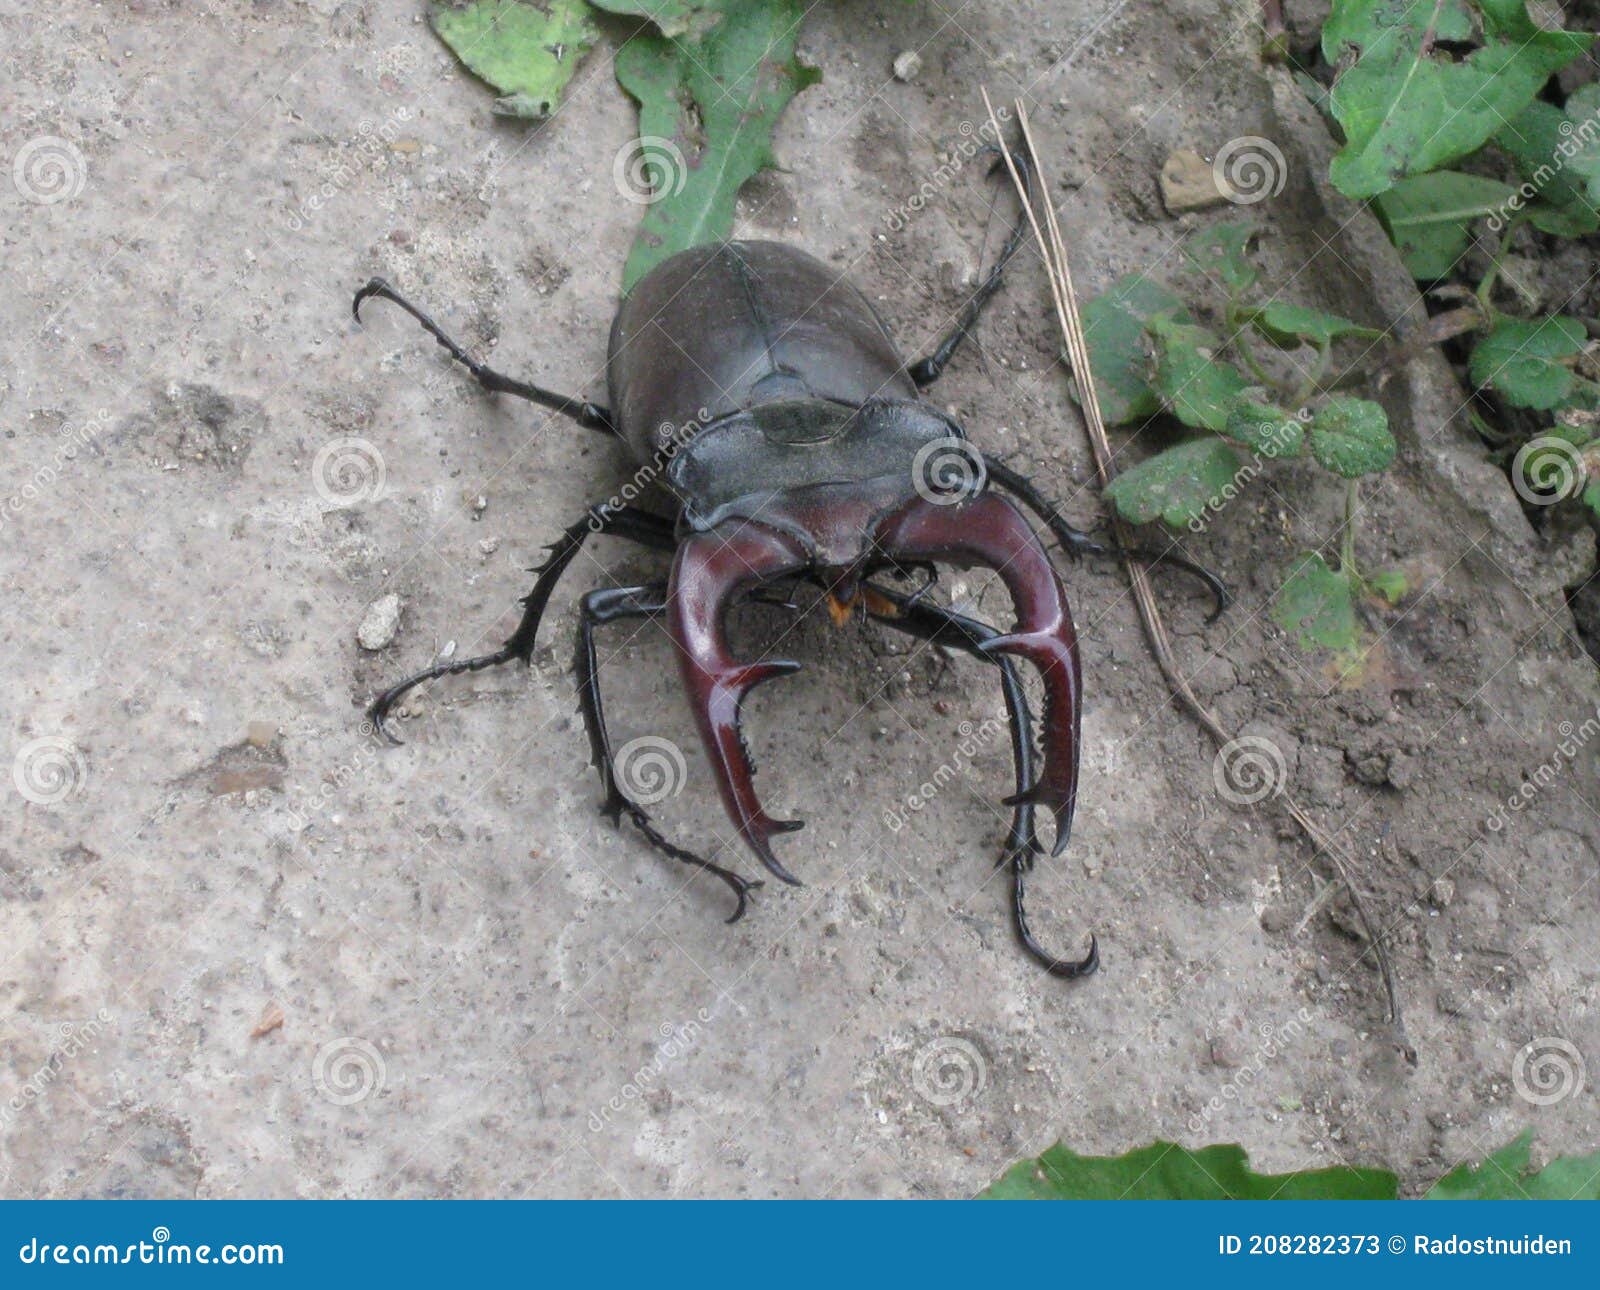 powerful stag beetle with strong ticks